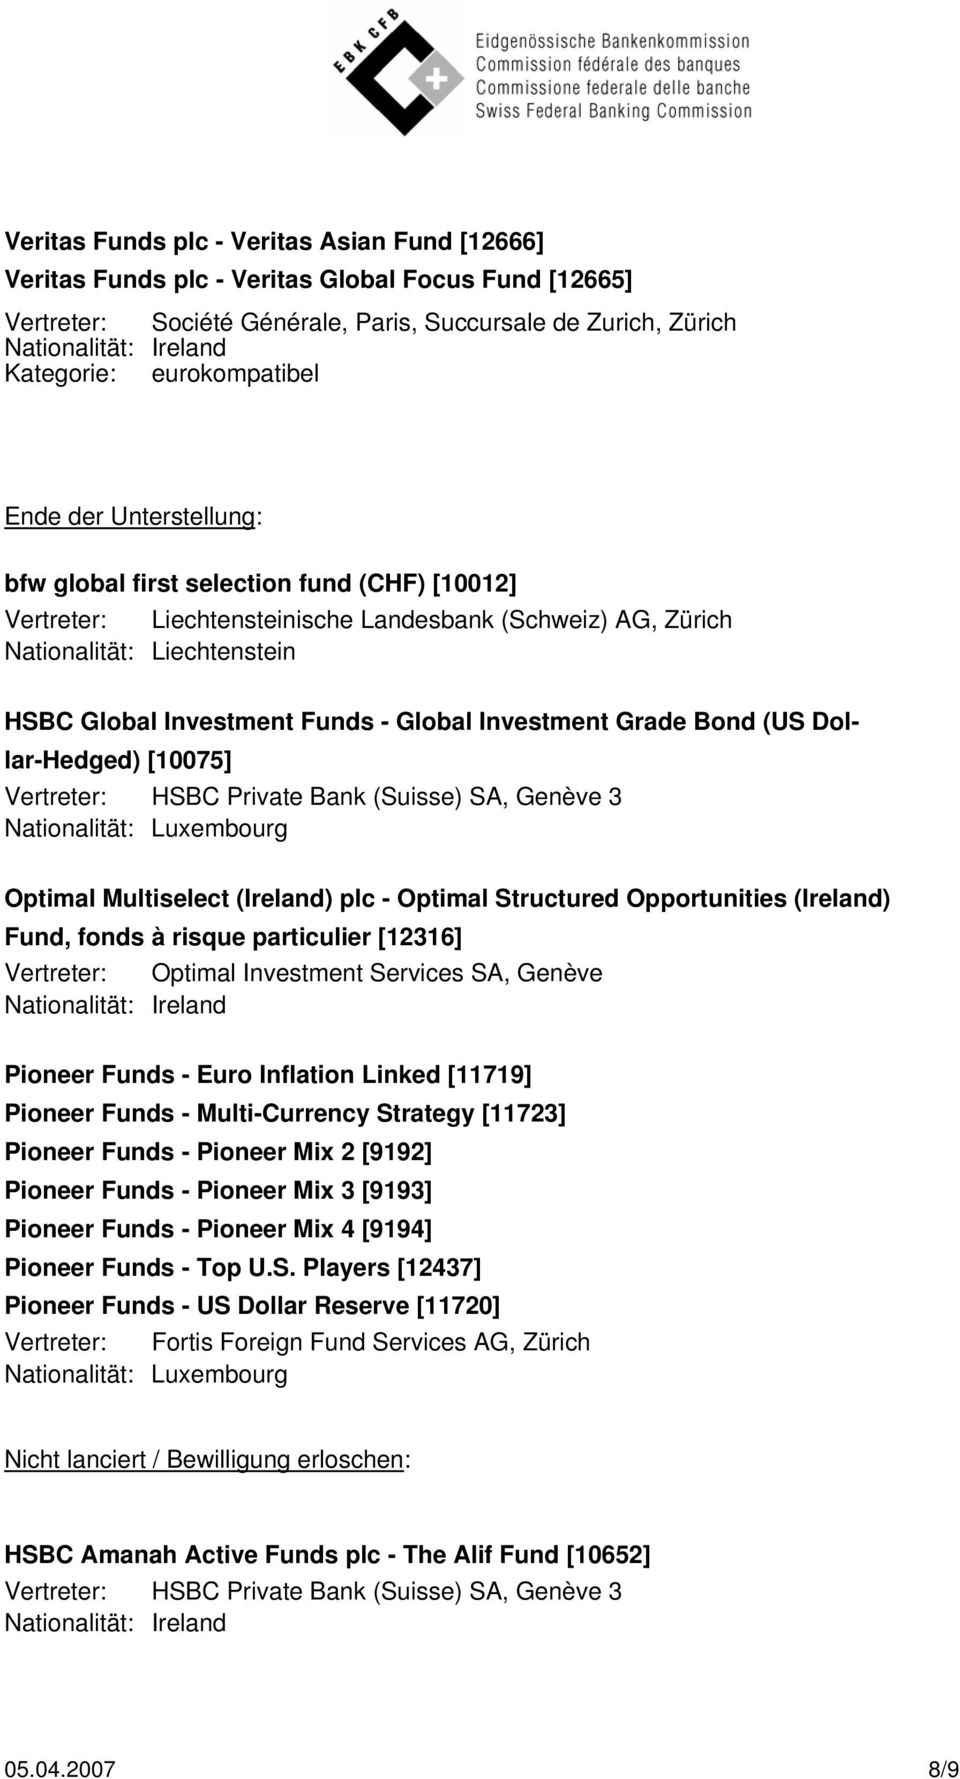 Dollar-Hedged) [10075] Vertreter: HSBC Private Bank (Suisse) SA, Genève 3 Optimal Multiselect (Ireland) plc - Optimal Structured Opportunities (Ireland) Fund, fonds à risque particulier [12316]